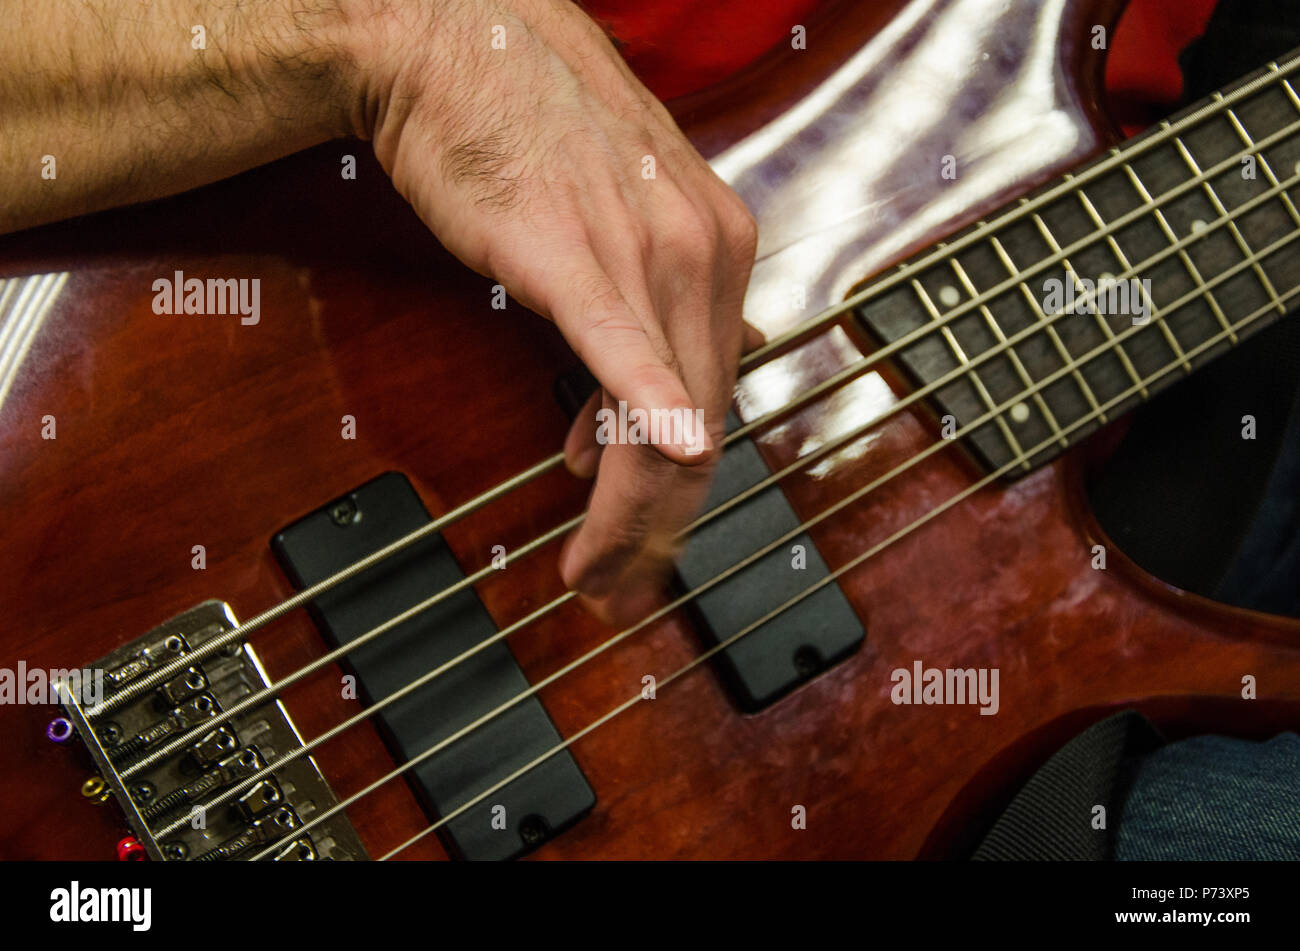 Closeup of photo of electric bass guitar player playing with hands Stock Photo